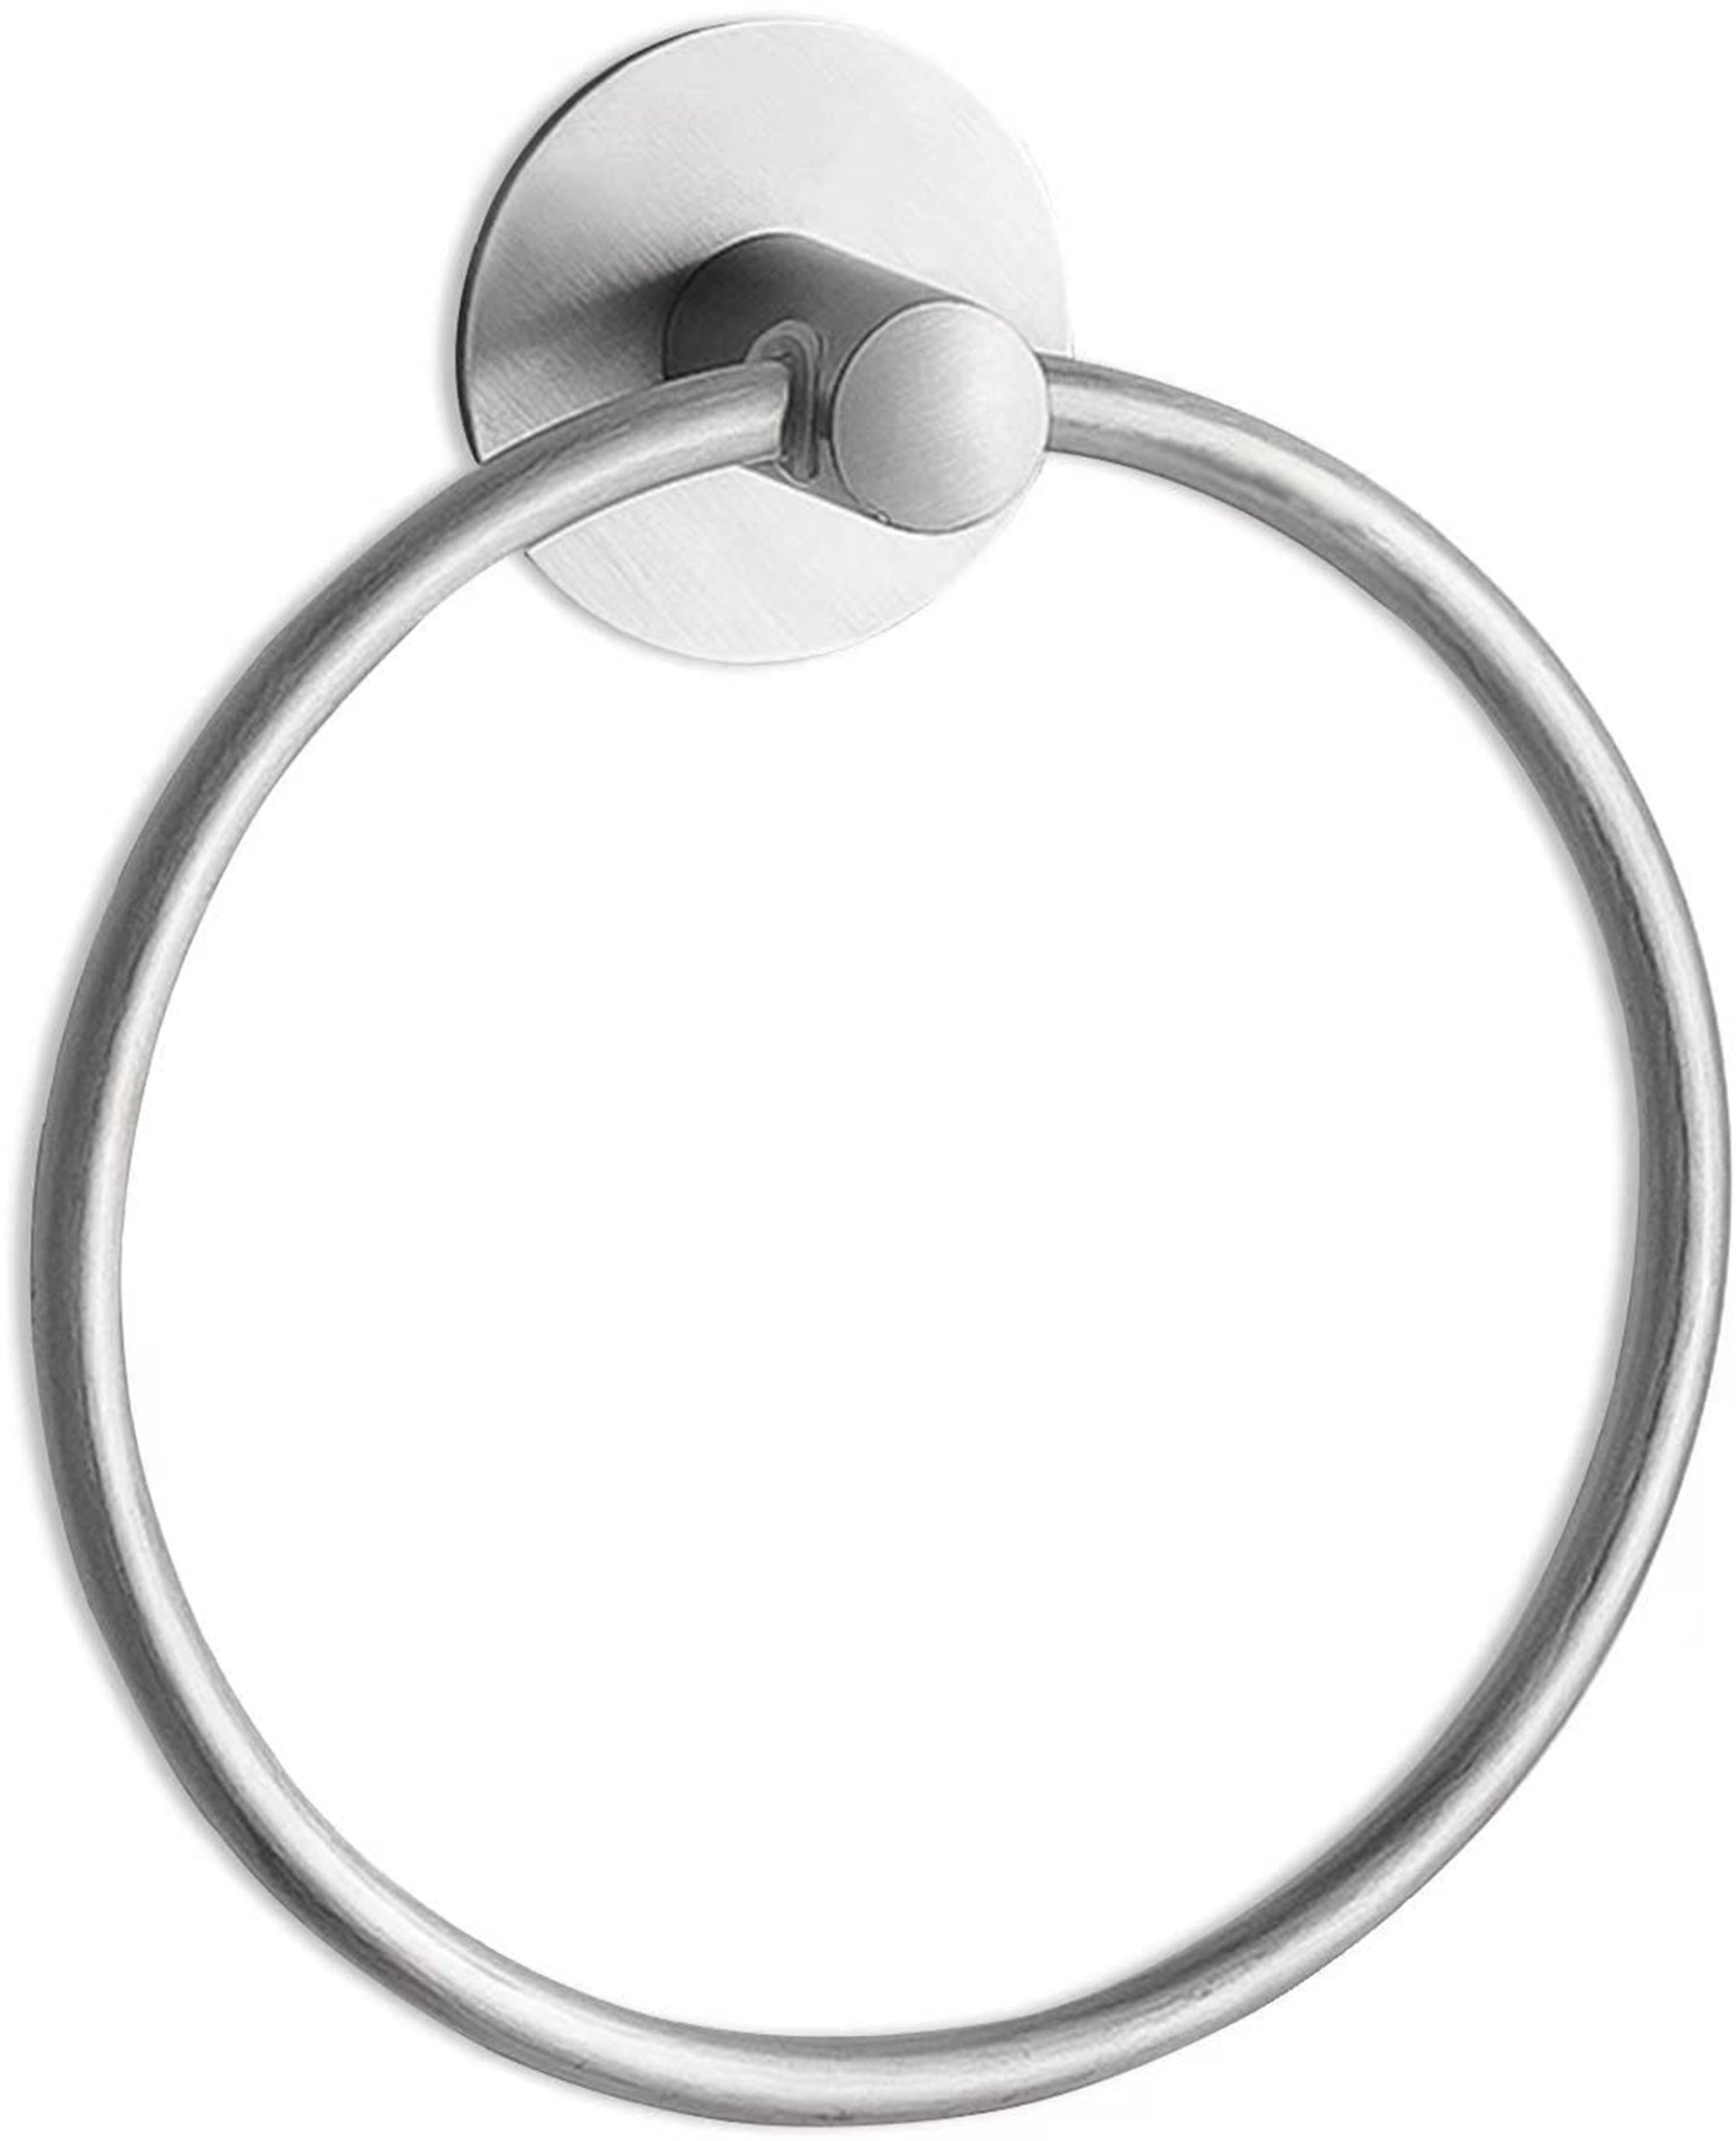 Hand Towel Ring Metal Zinc Base Wall Mount Minimalist Style in Chrome Finish 